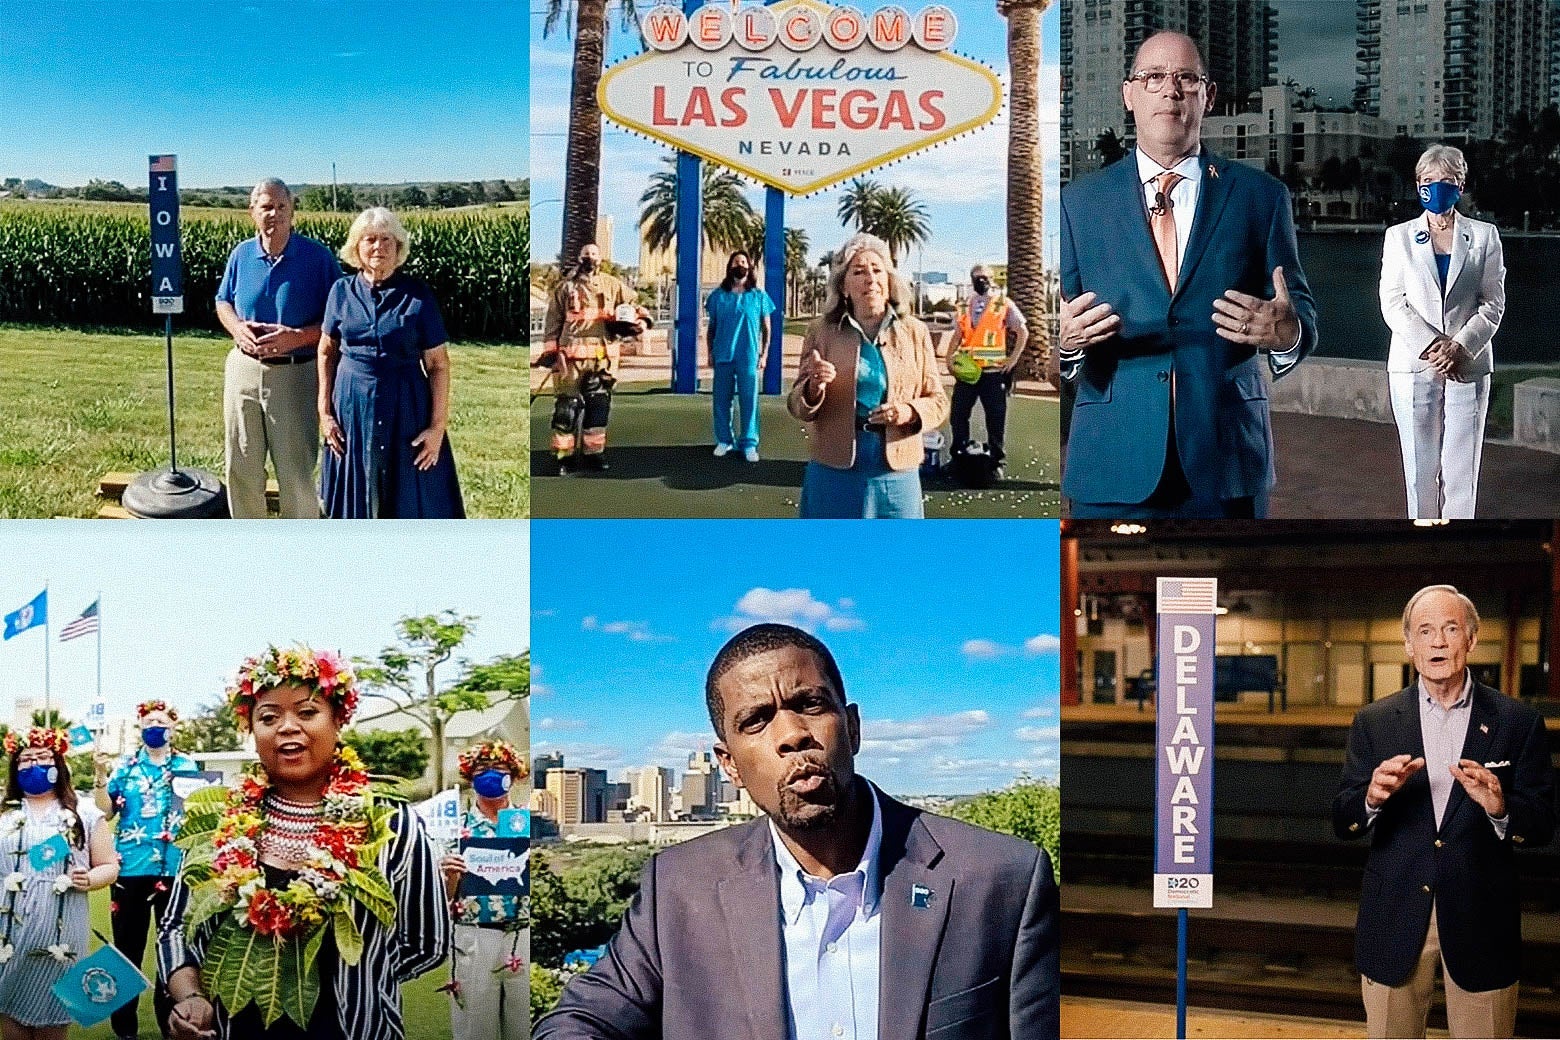 Two elderly people standing in a cornfield next to an Iowa sign; a woman in a jacket stands in front of a Las Vegas sign and a person in firefighter garb, a person in medical scrubs, and a person in a reflective vest; a man stands in front of a skyline and a woman in a white pantsuit; a woman in a flower crown and lei stands in front of several people wearing masks; a man in a suit jacket speaks in front of trees; an elderly man speaks in a train station in front of the tracks next to a Delaware sign.